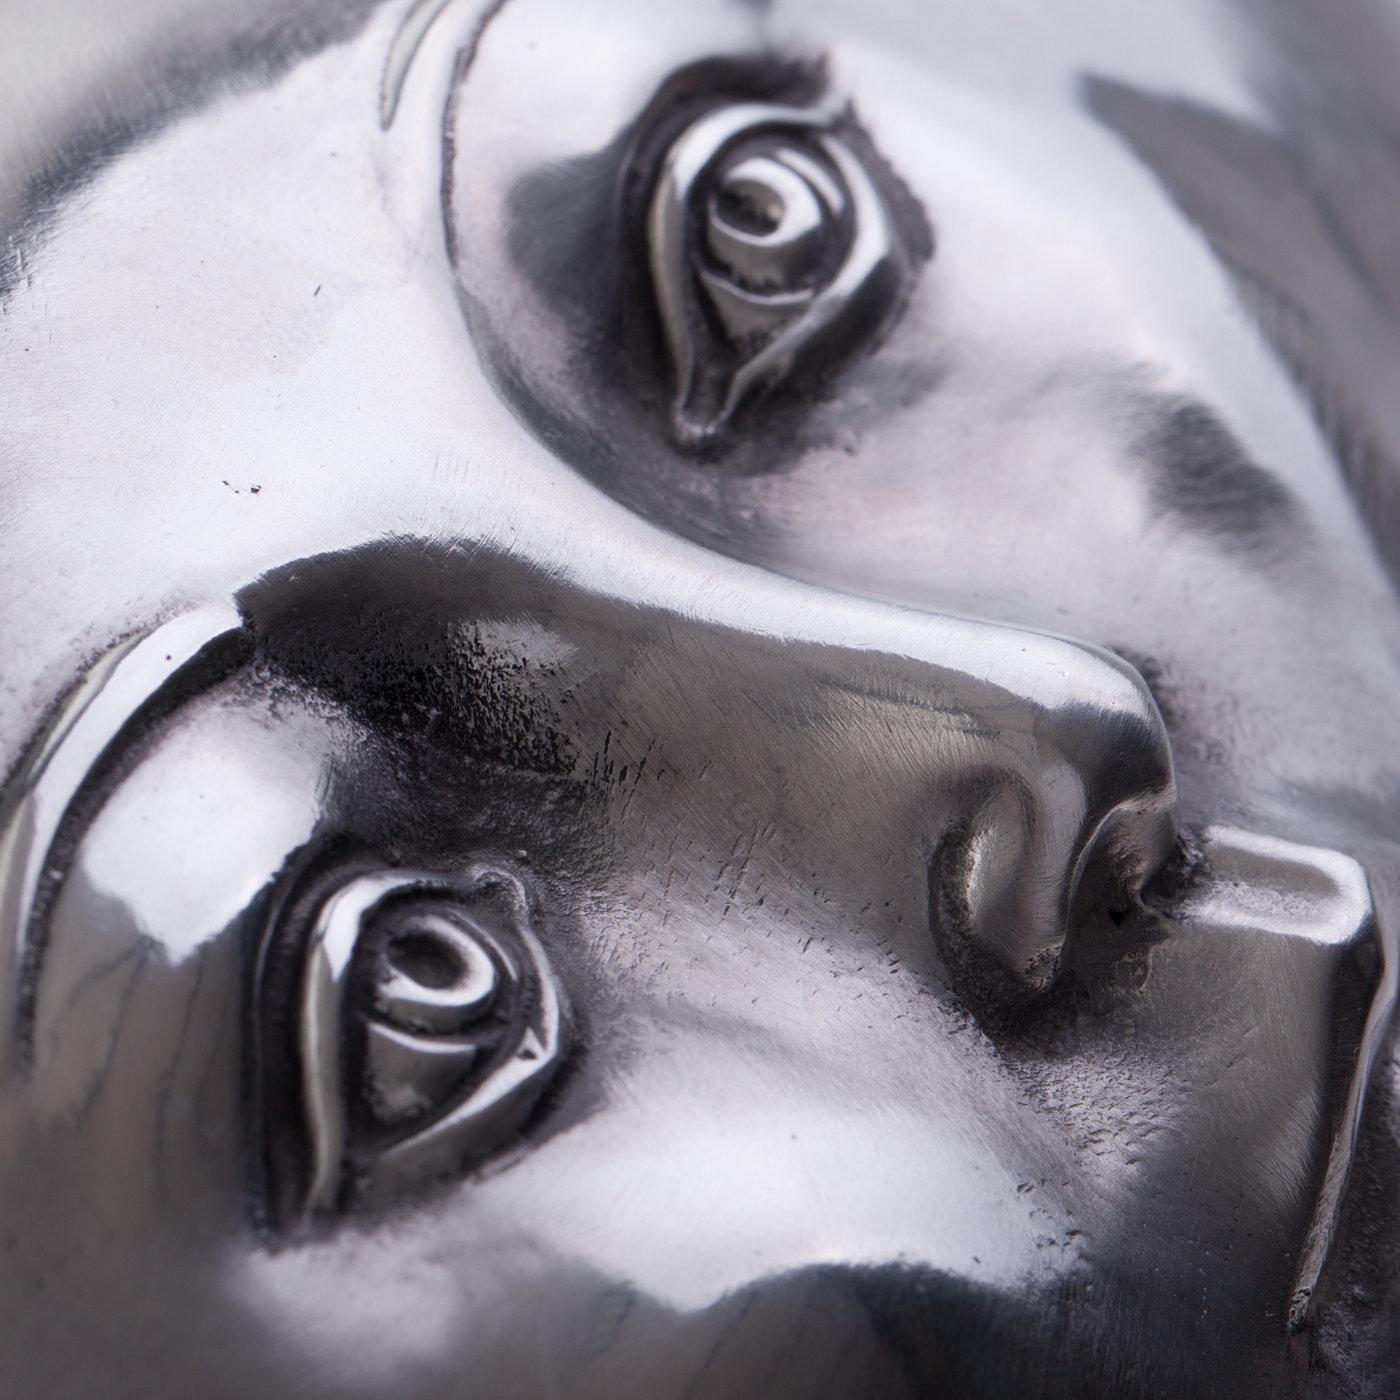 Symbolizing a cure for society's ills, this typically surreal sculpture by Florentine artist Leonardo Bossio depicts a large pill with an intricately sculpted human face. Hand-cast in aluminum and polished to a glazed finish.